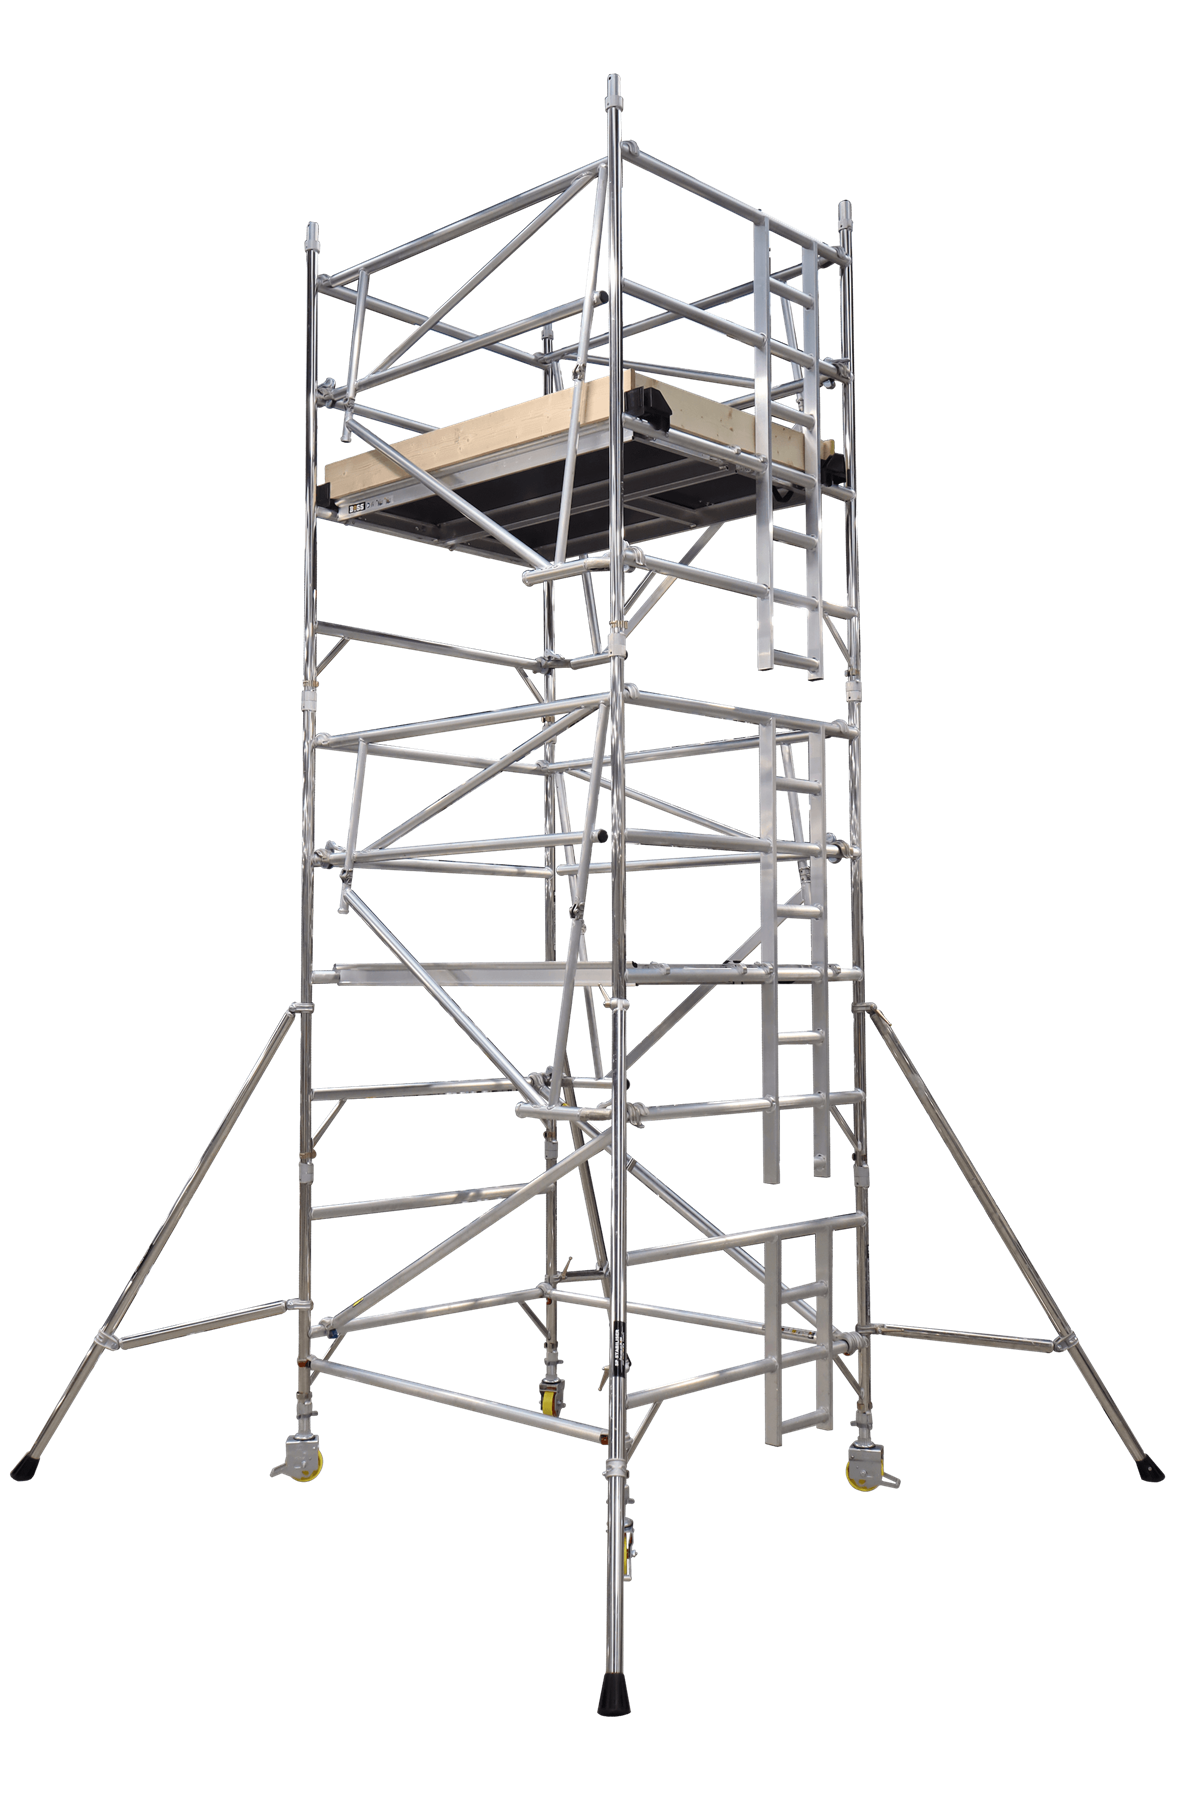 BoSS Ladderspan AGR Towers for general use